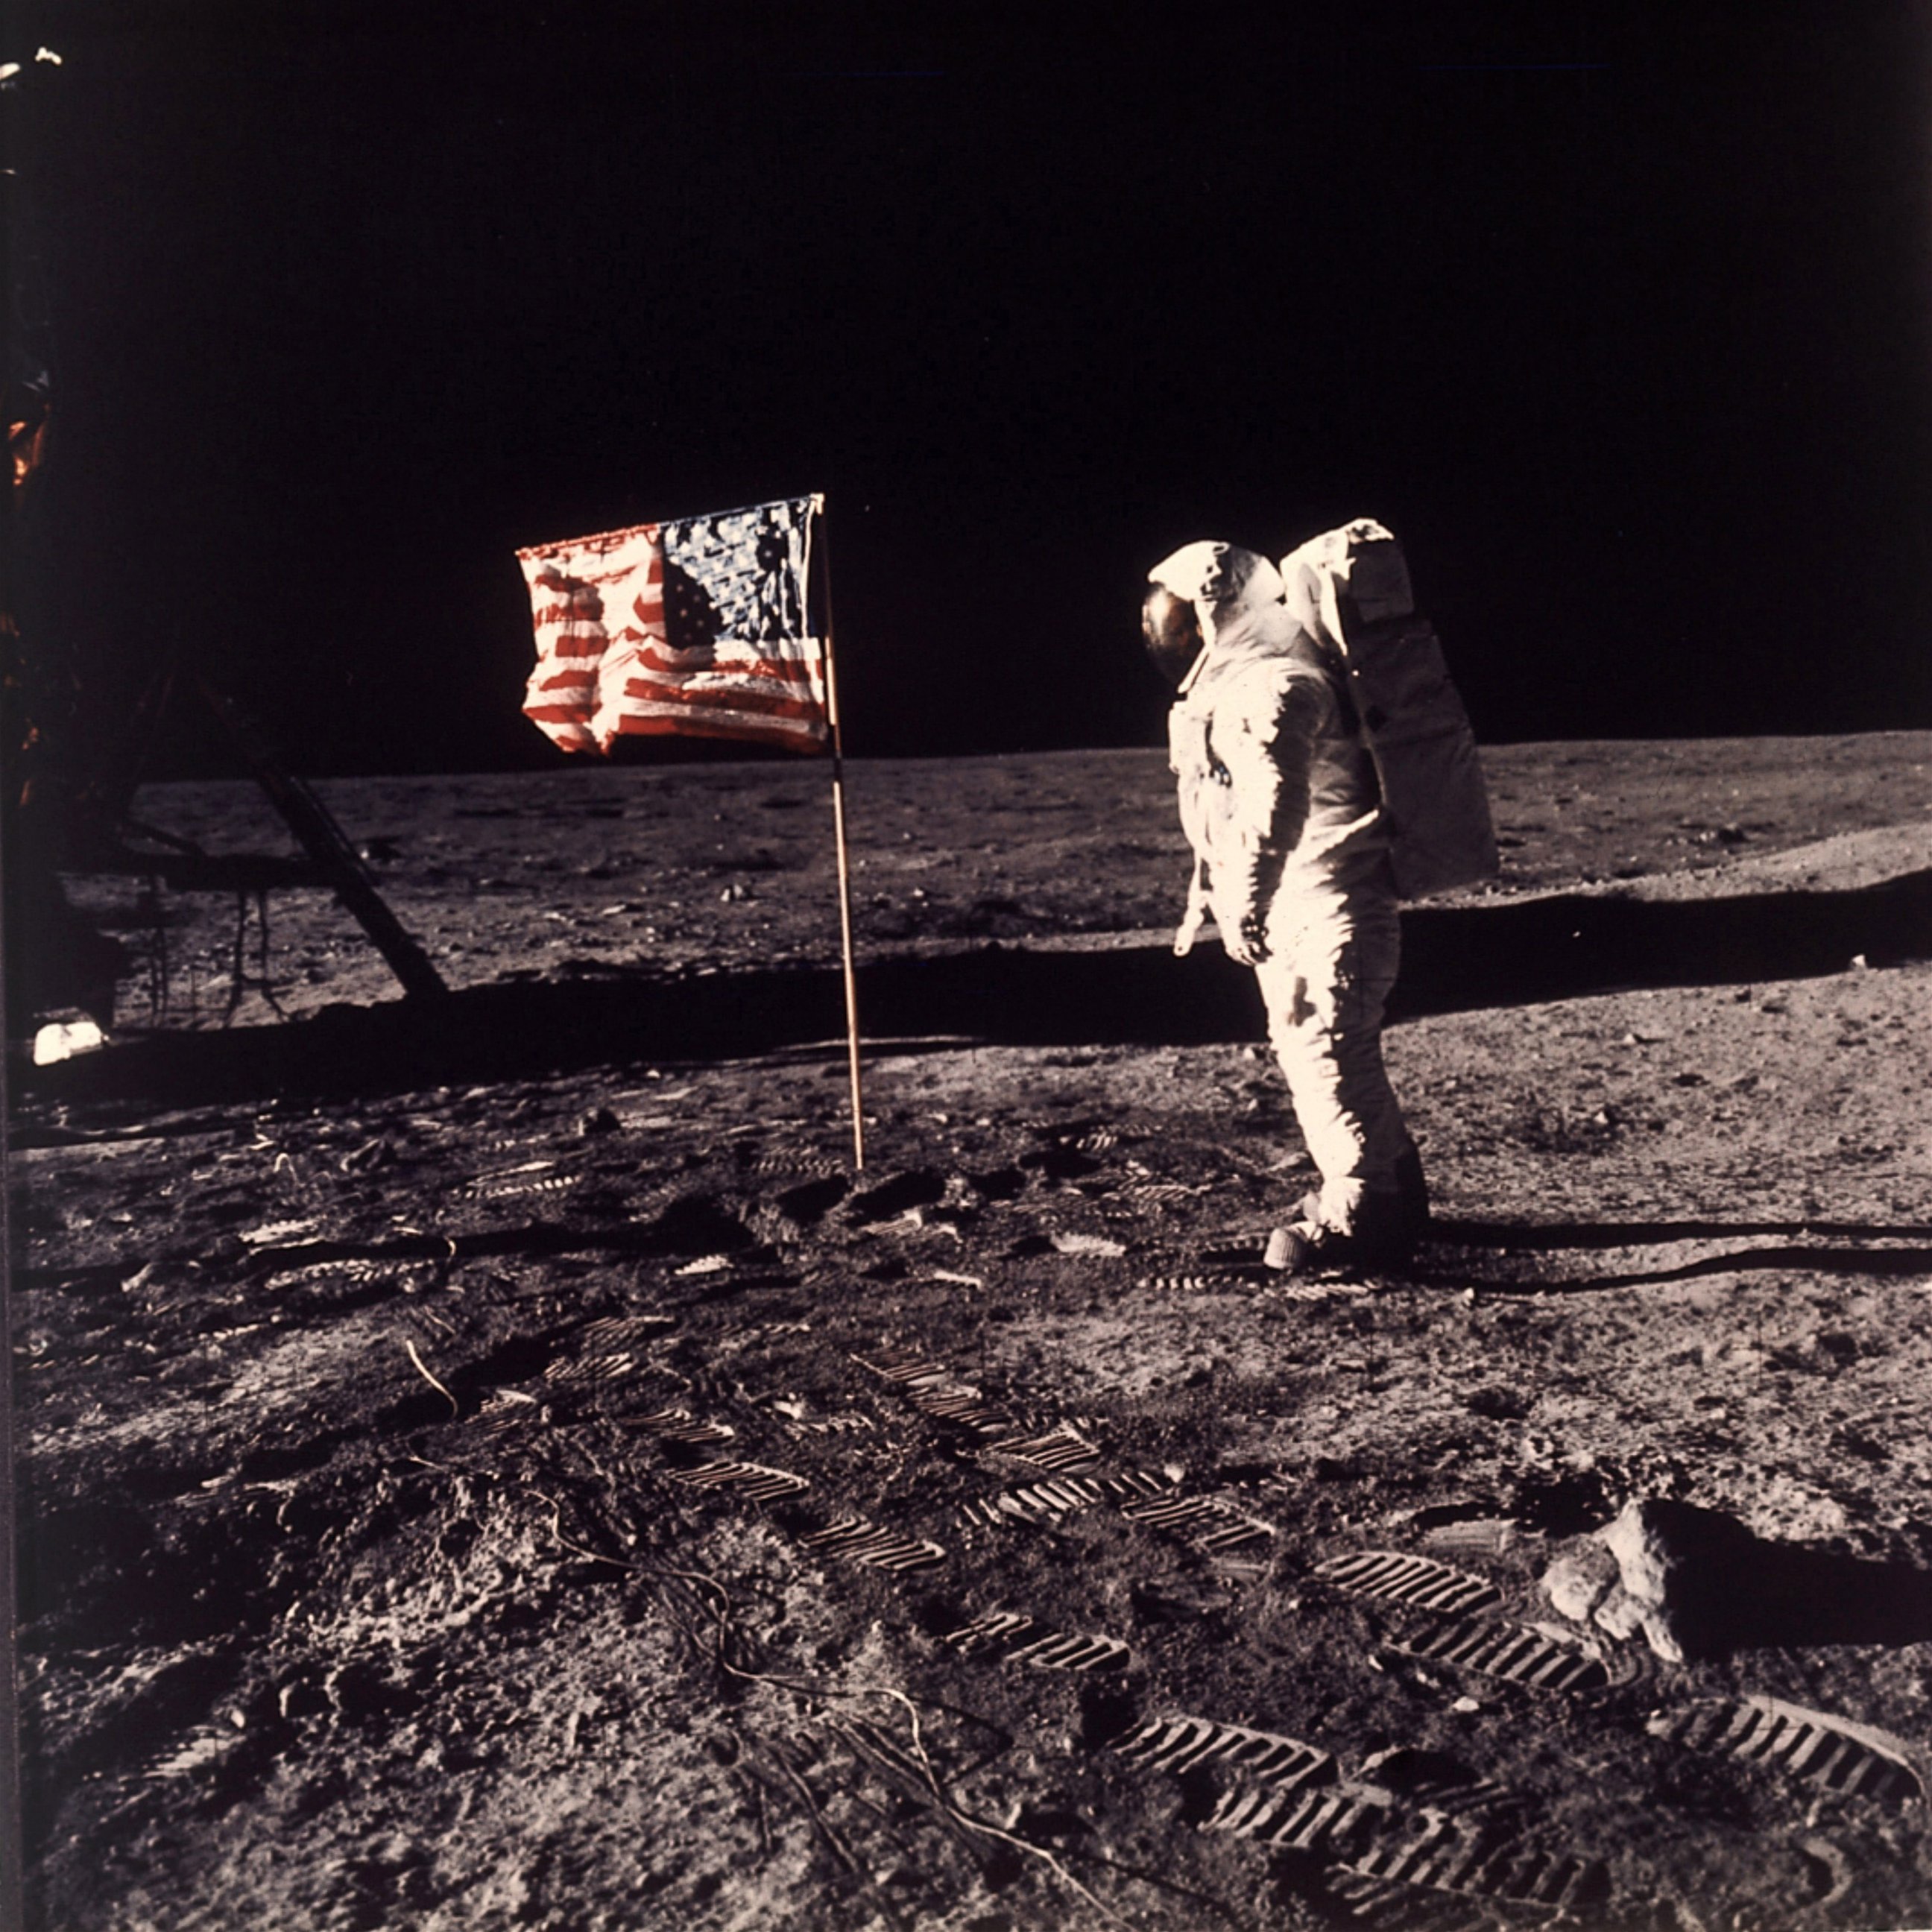 PHOTO: This July 20, 1969 file photo provided by NASA shows astronaut Edwin E. "Buzz" Aldrin Jr. posing for a photograph beside the U.S. flag deployed on the moon during the Apollo 11 mission. 